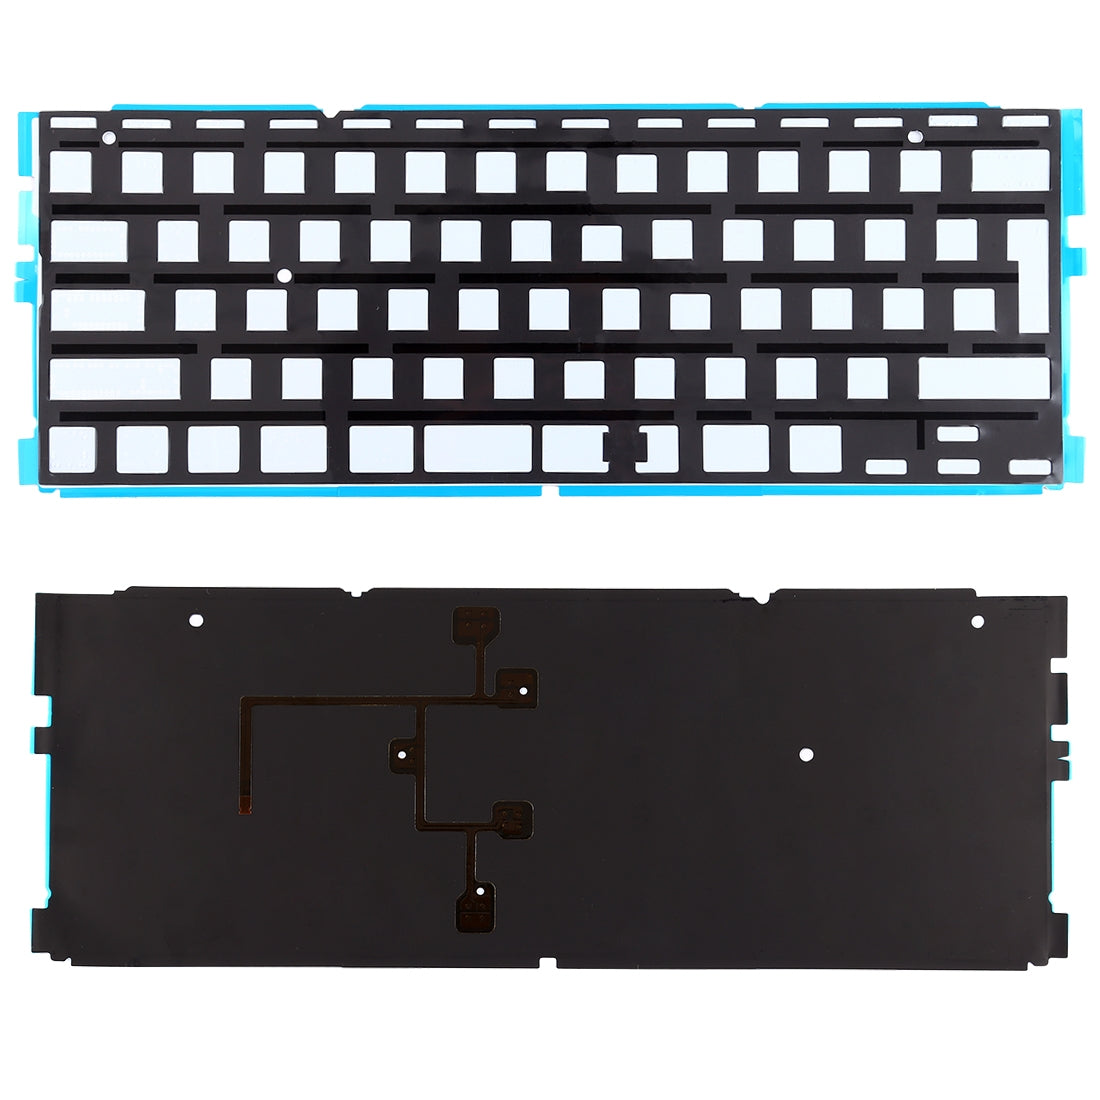 Backlight Keyboard UK Version without ñ MacBook Air 11.6 A1370 A1465